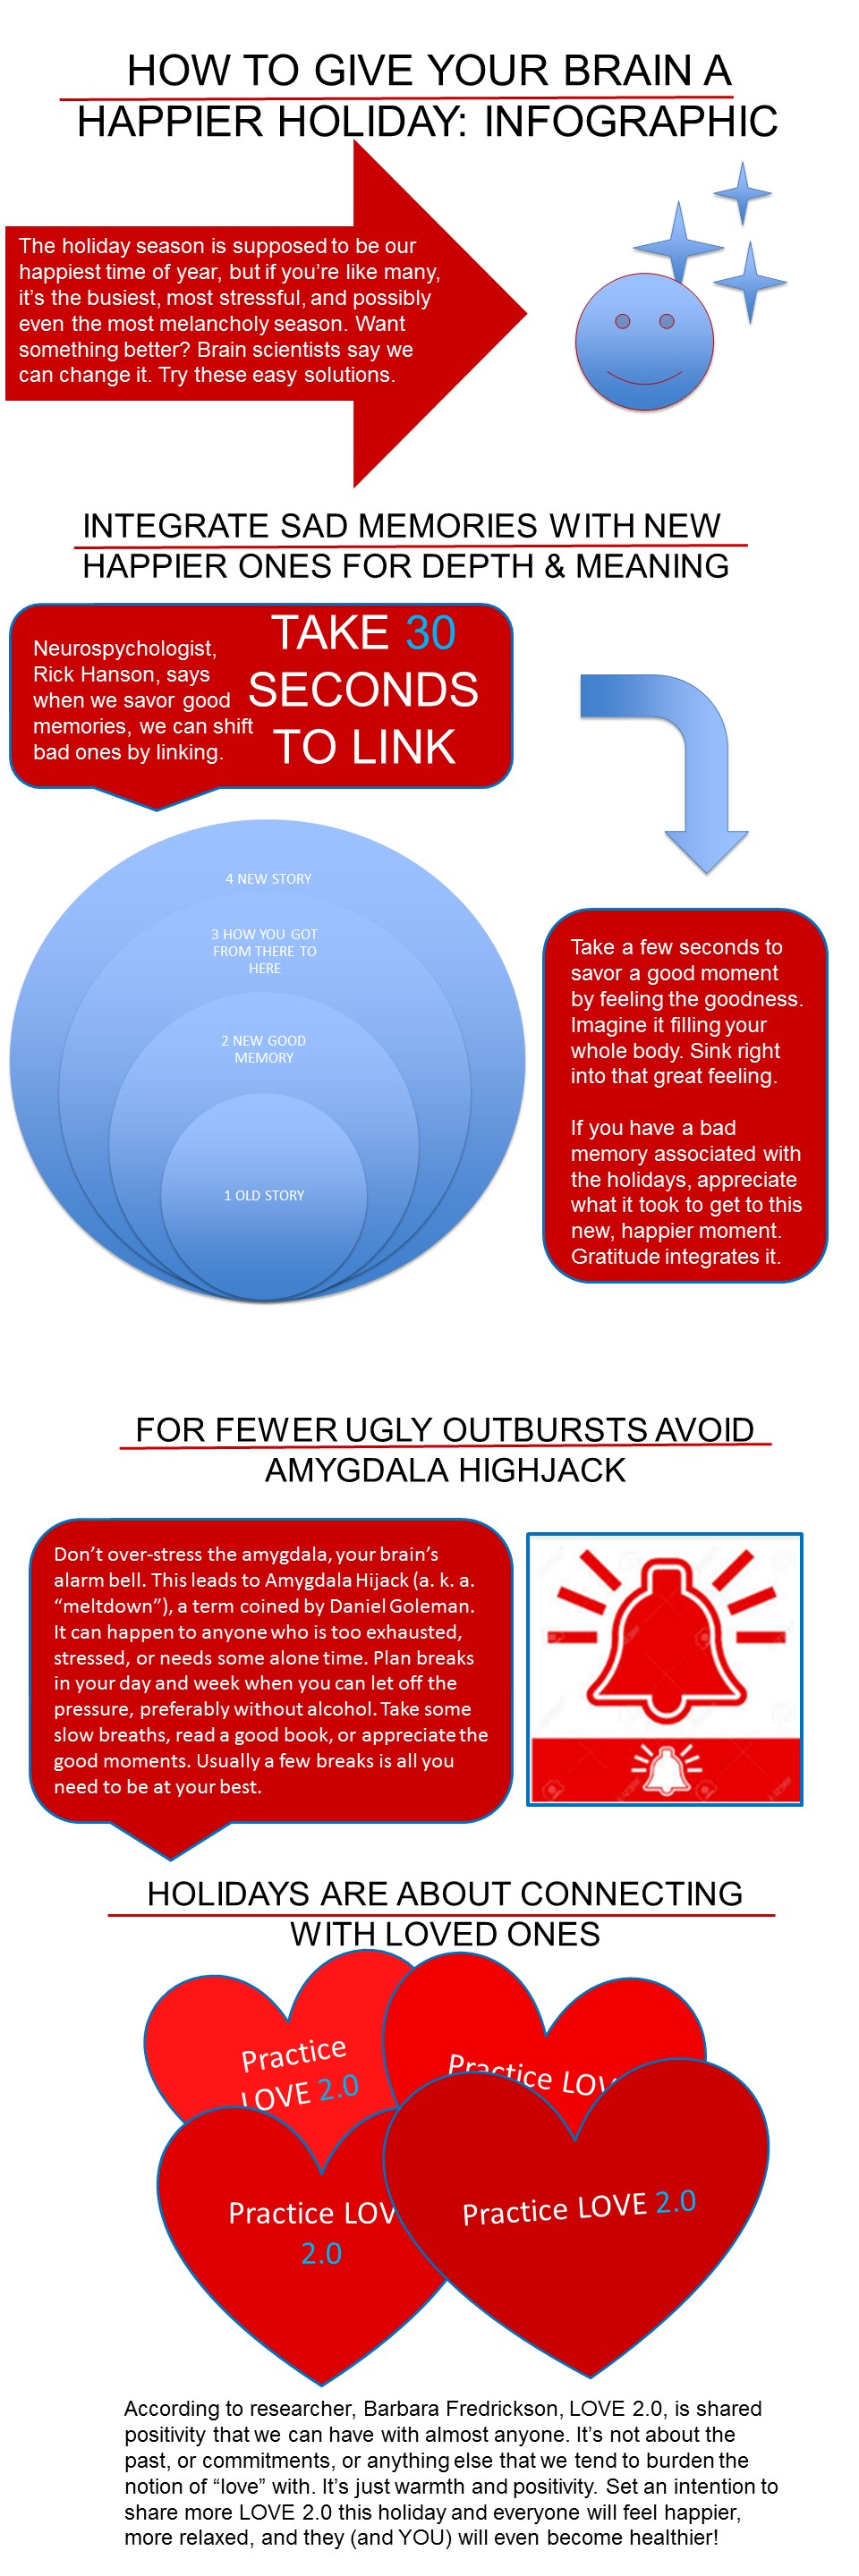 How to Give Your Brain a Happier Holiday Infographic